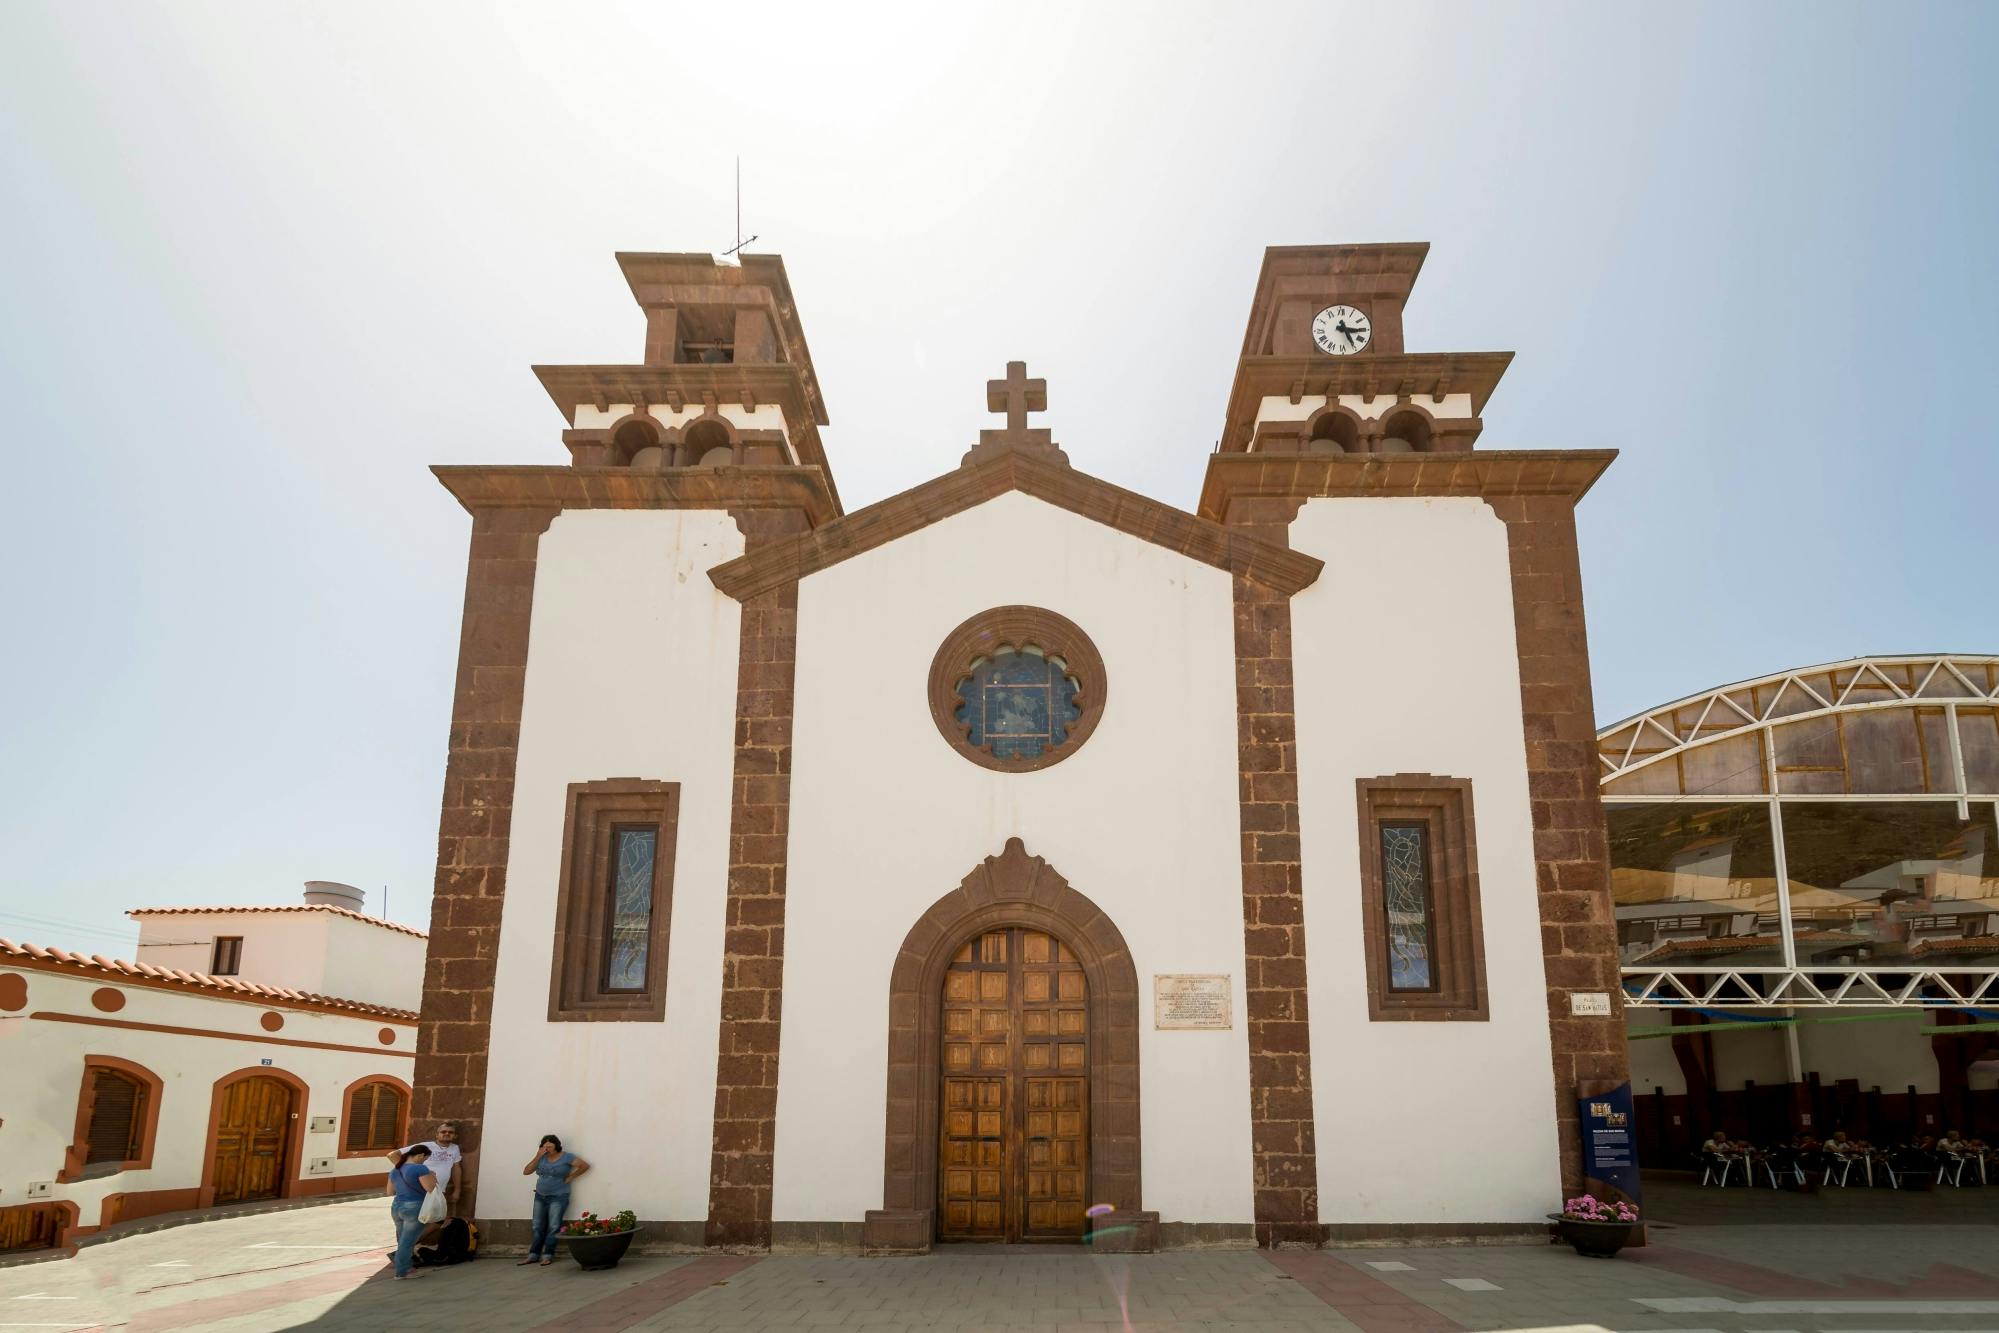 Gran Canaria Small Group Island Tour with Local Lunch